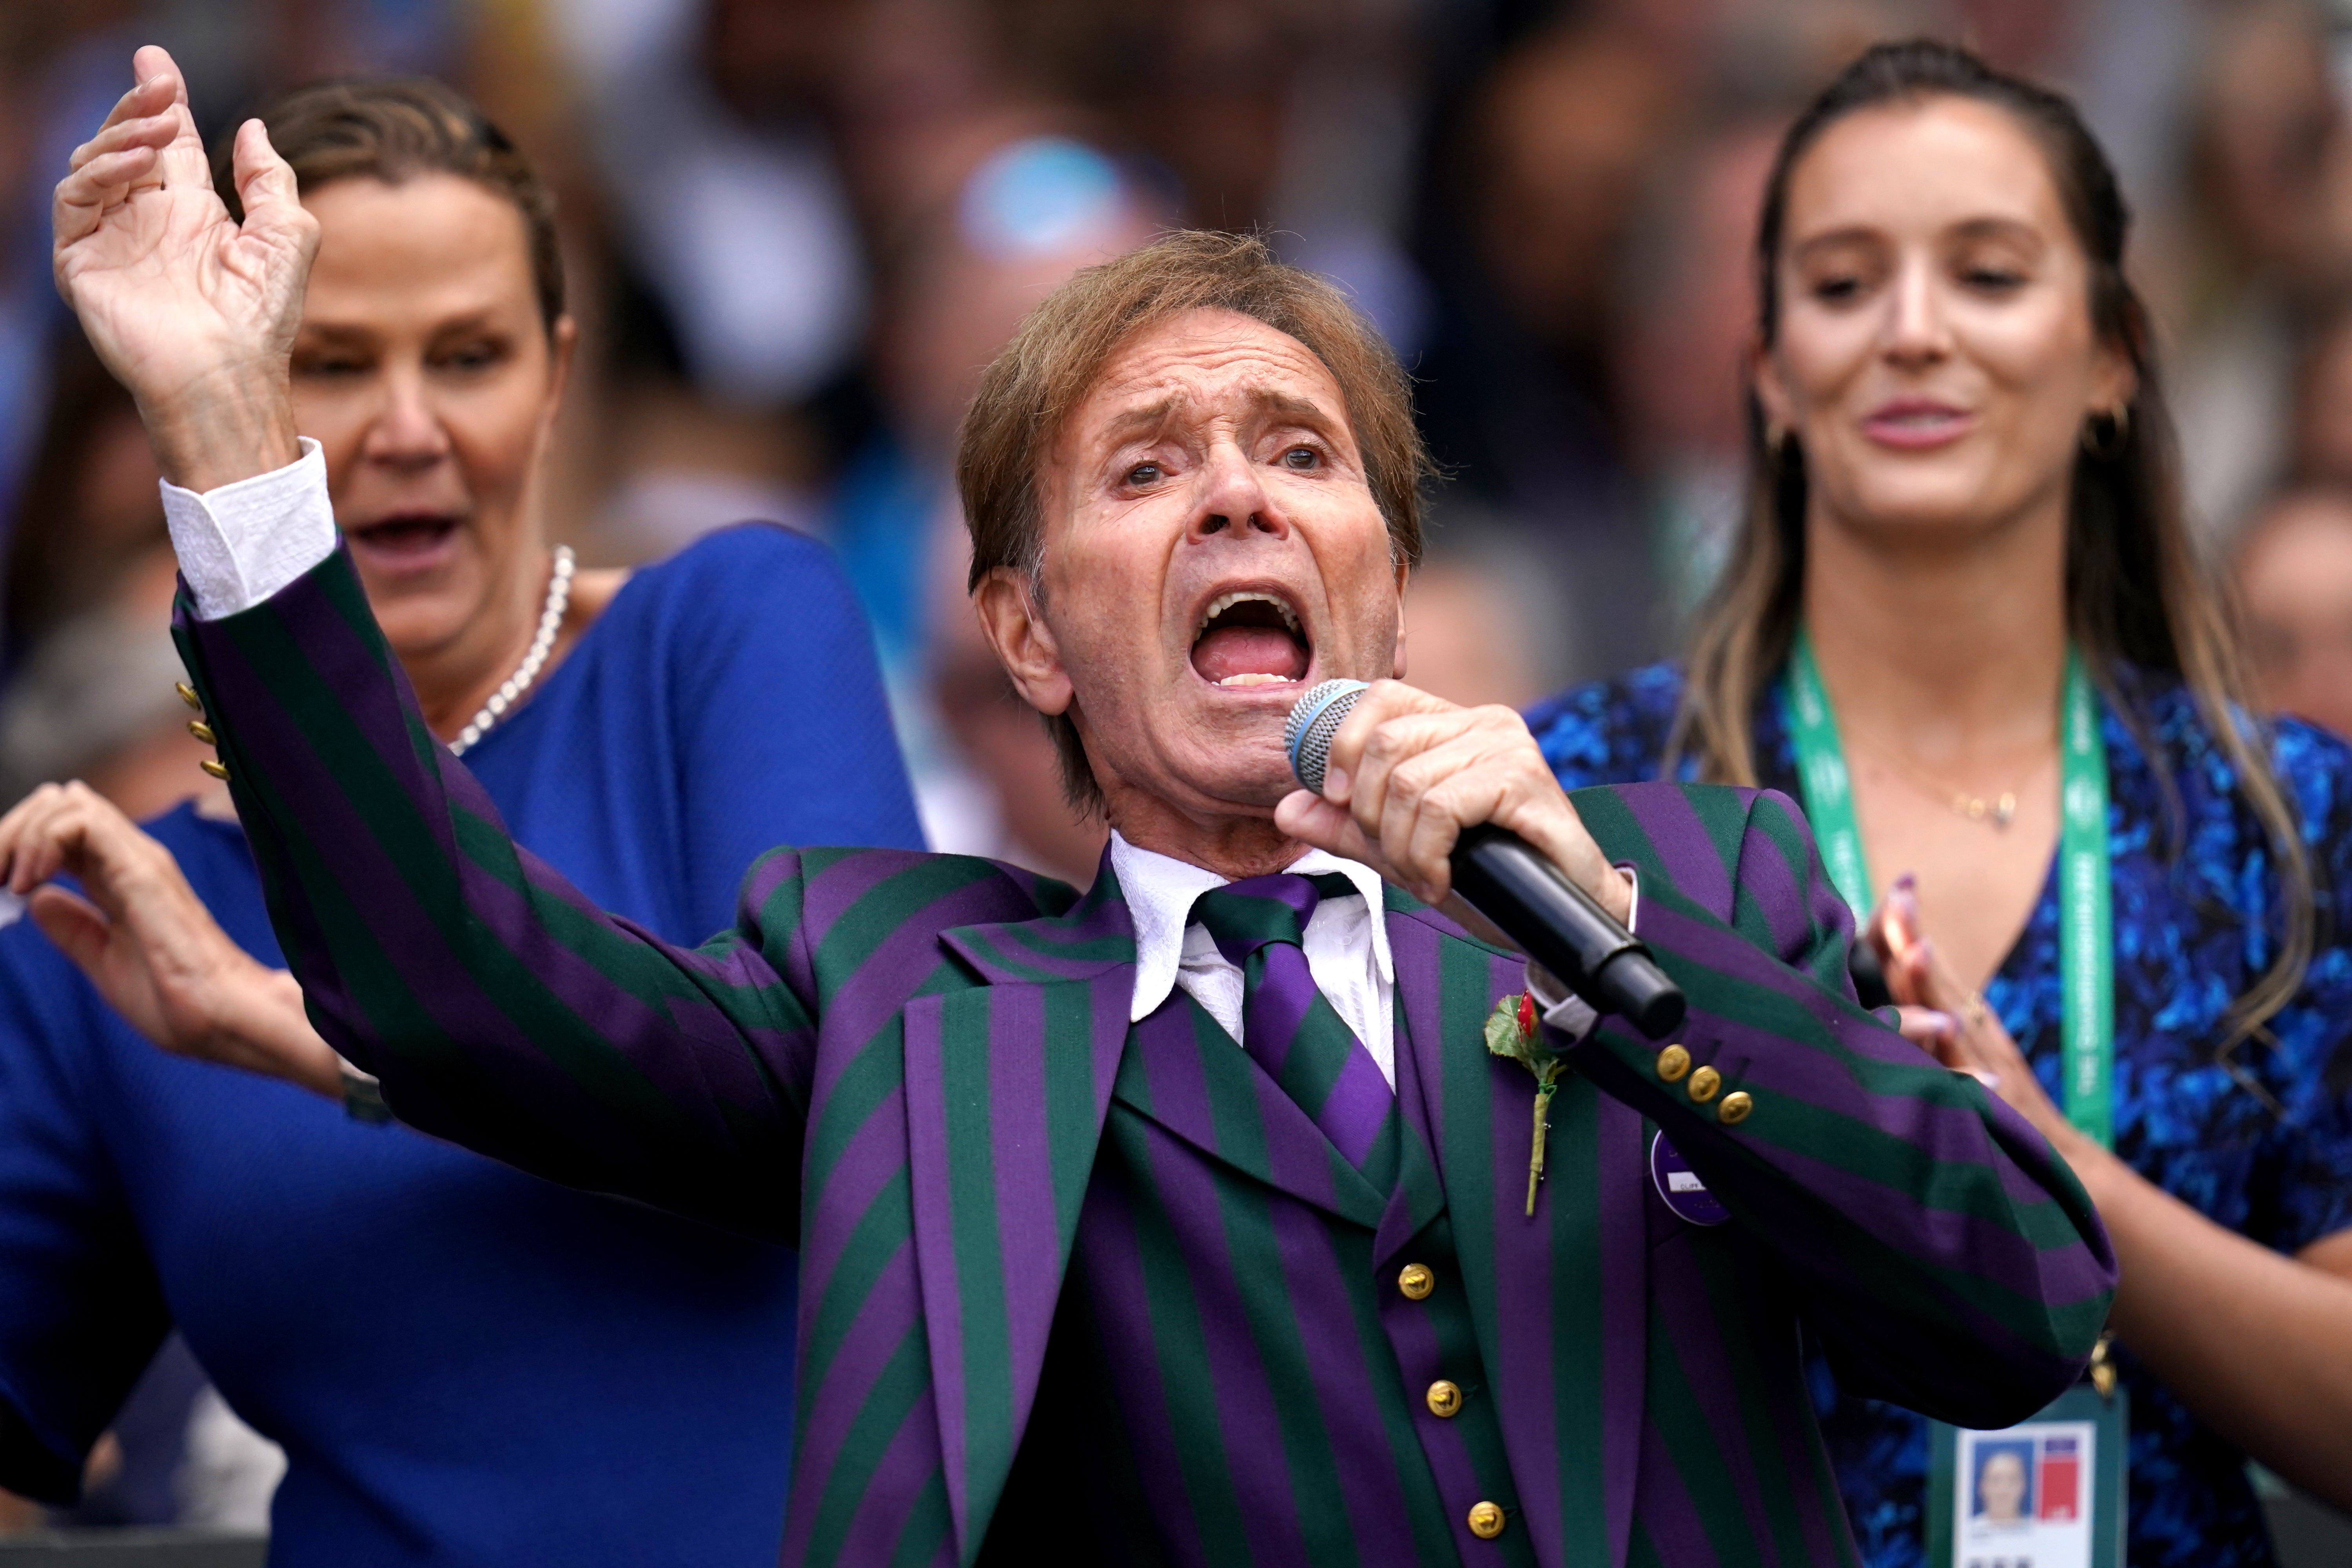 Sir Cliff Richard rolled back the years by singing ‘Summer Holiday’ (John Walton/PA)